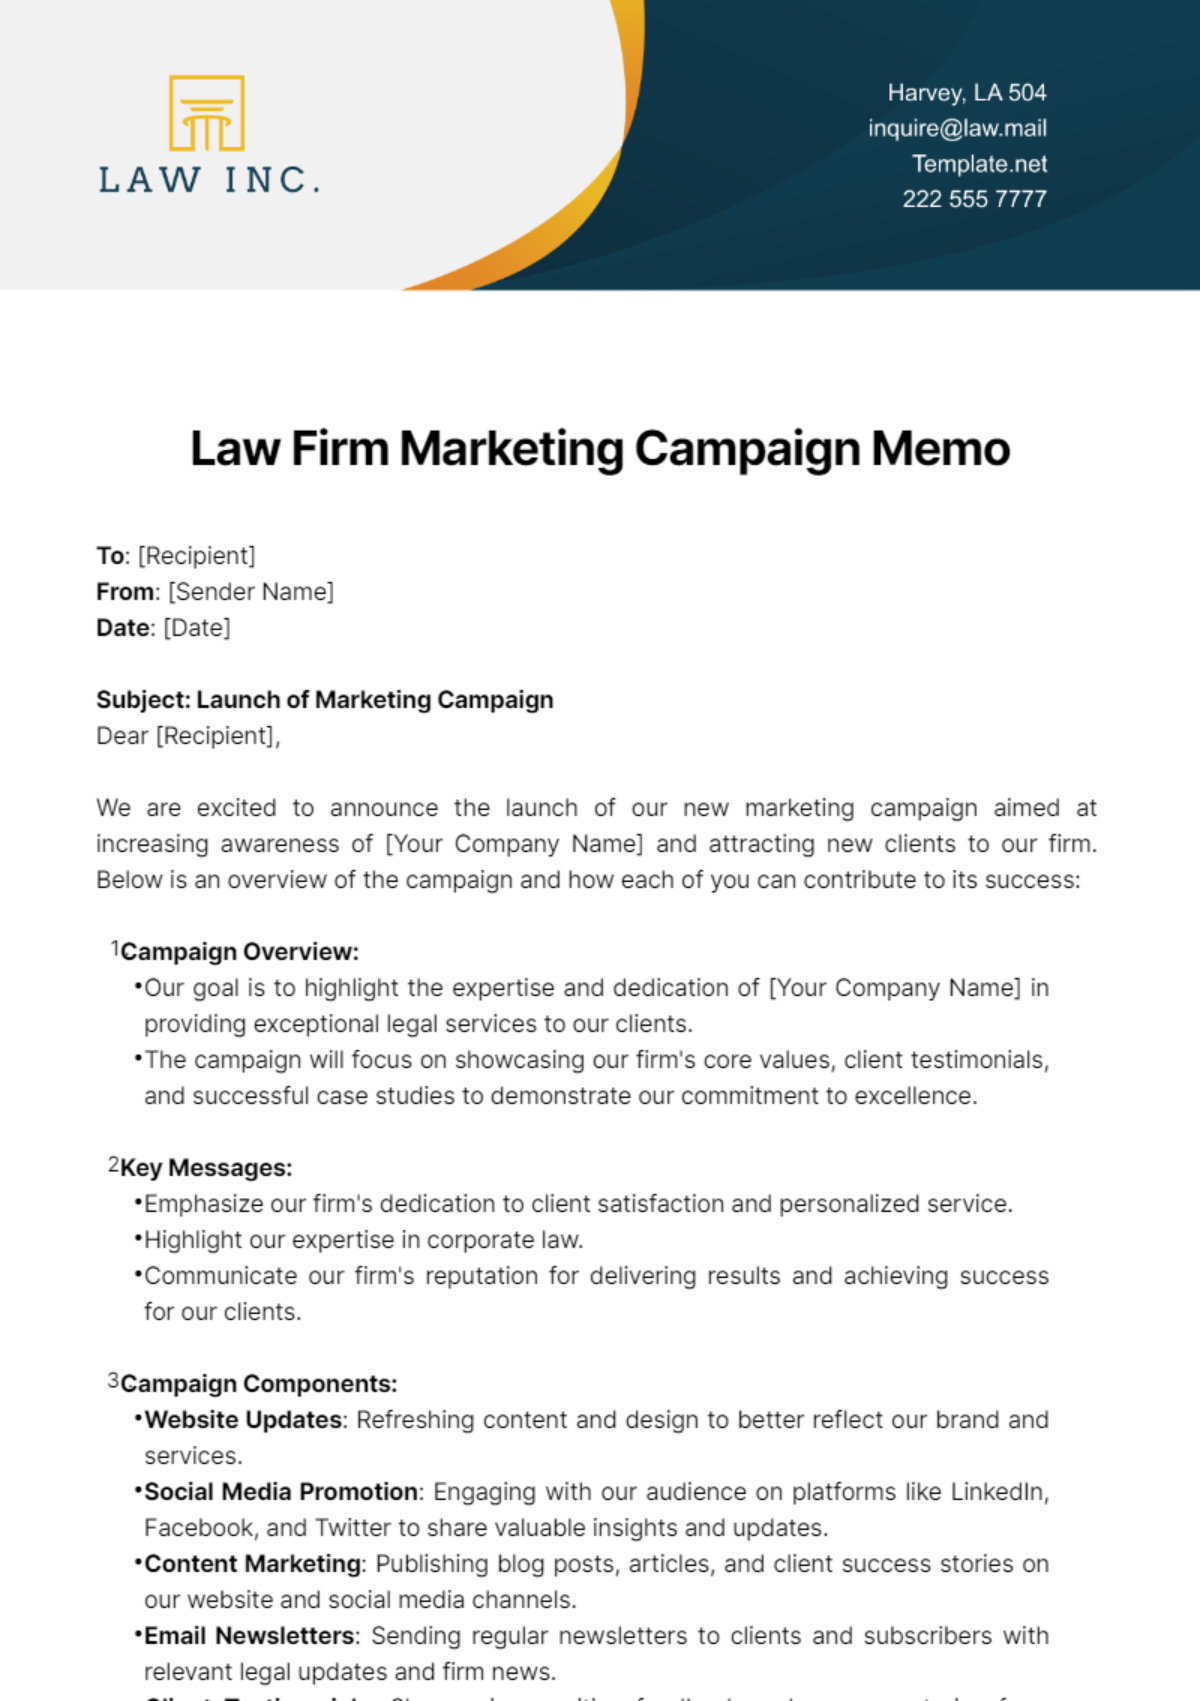 Free Law Firm Marketing Campaign Memo Template